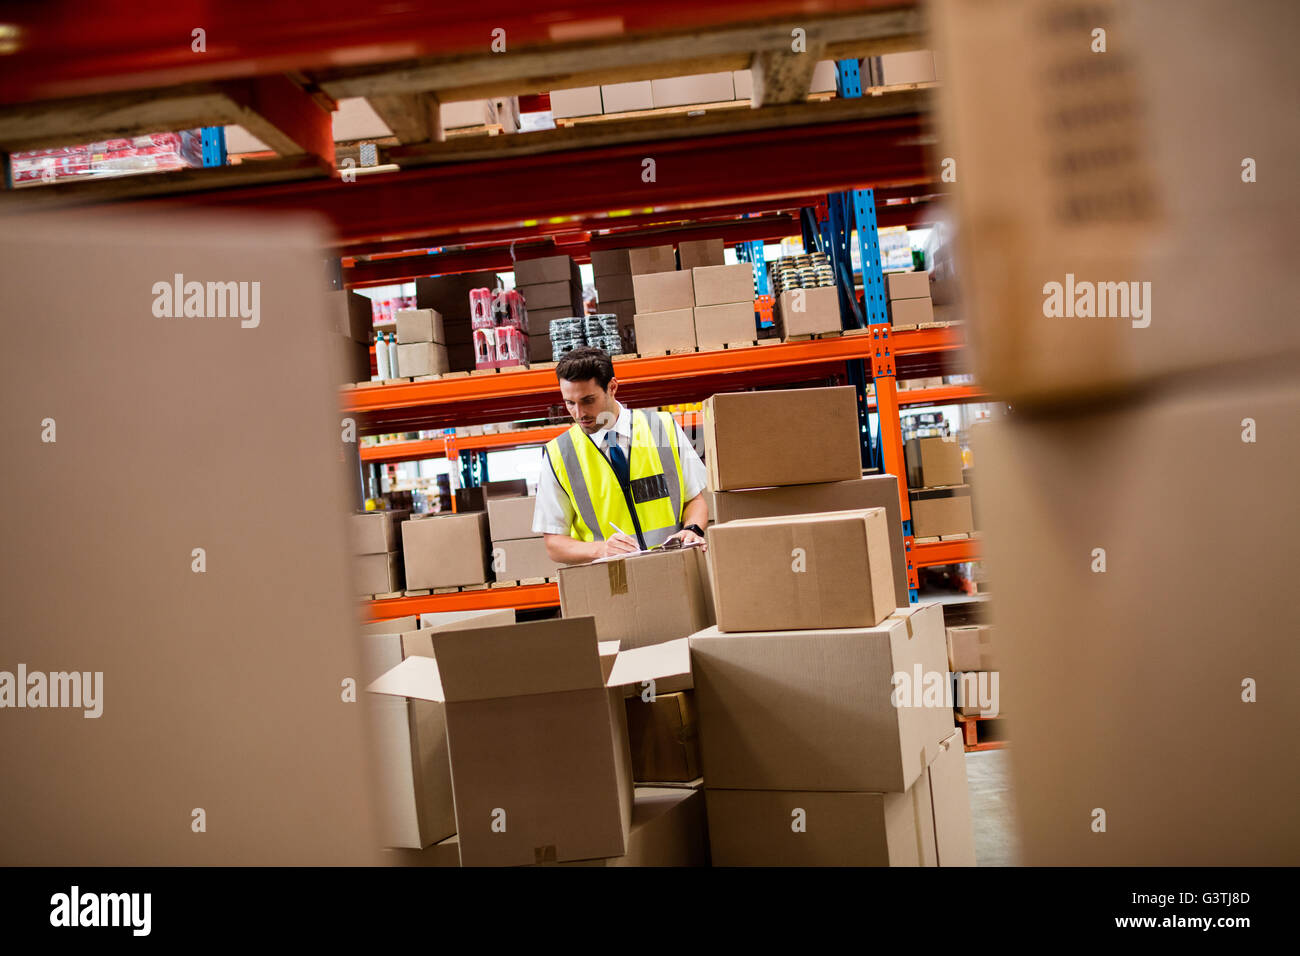 Warehouse manager checking boxes Stock Photo